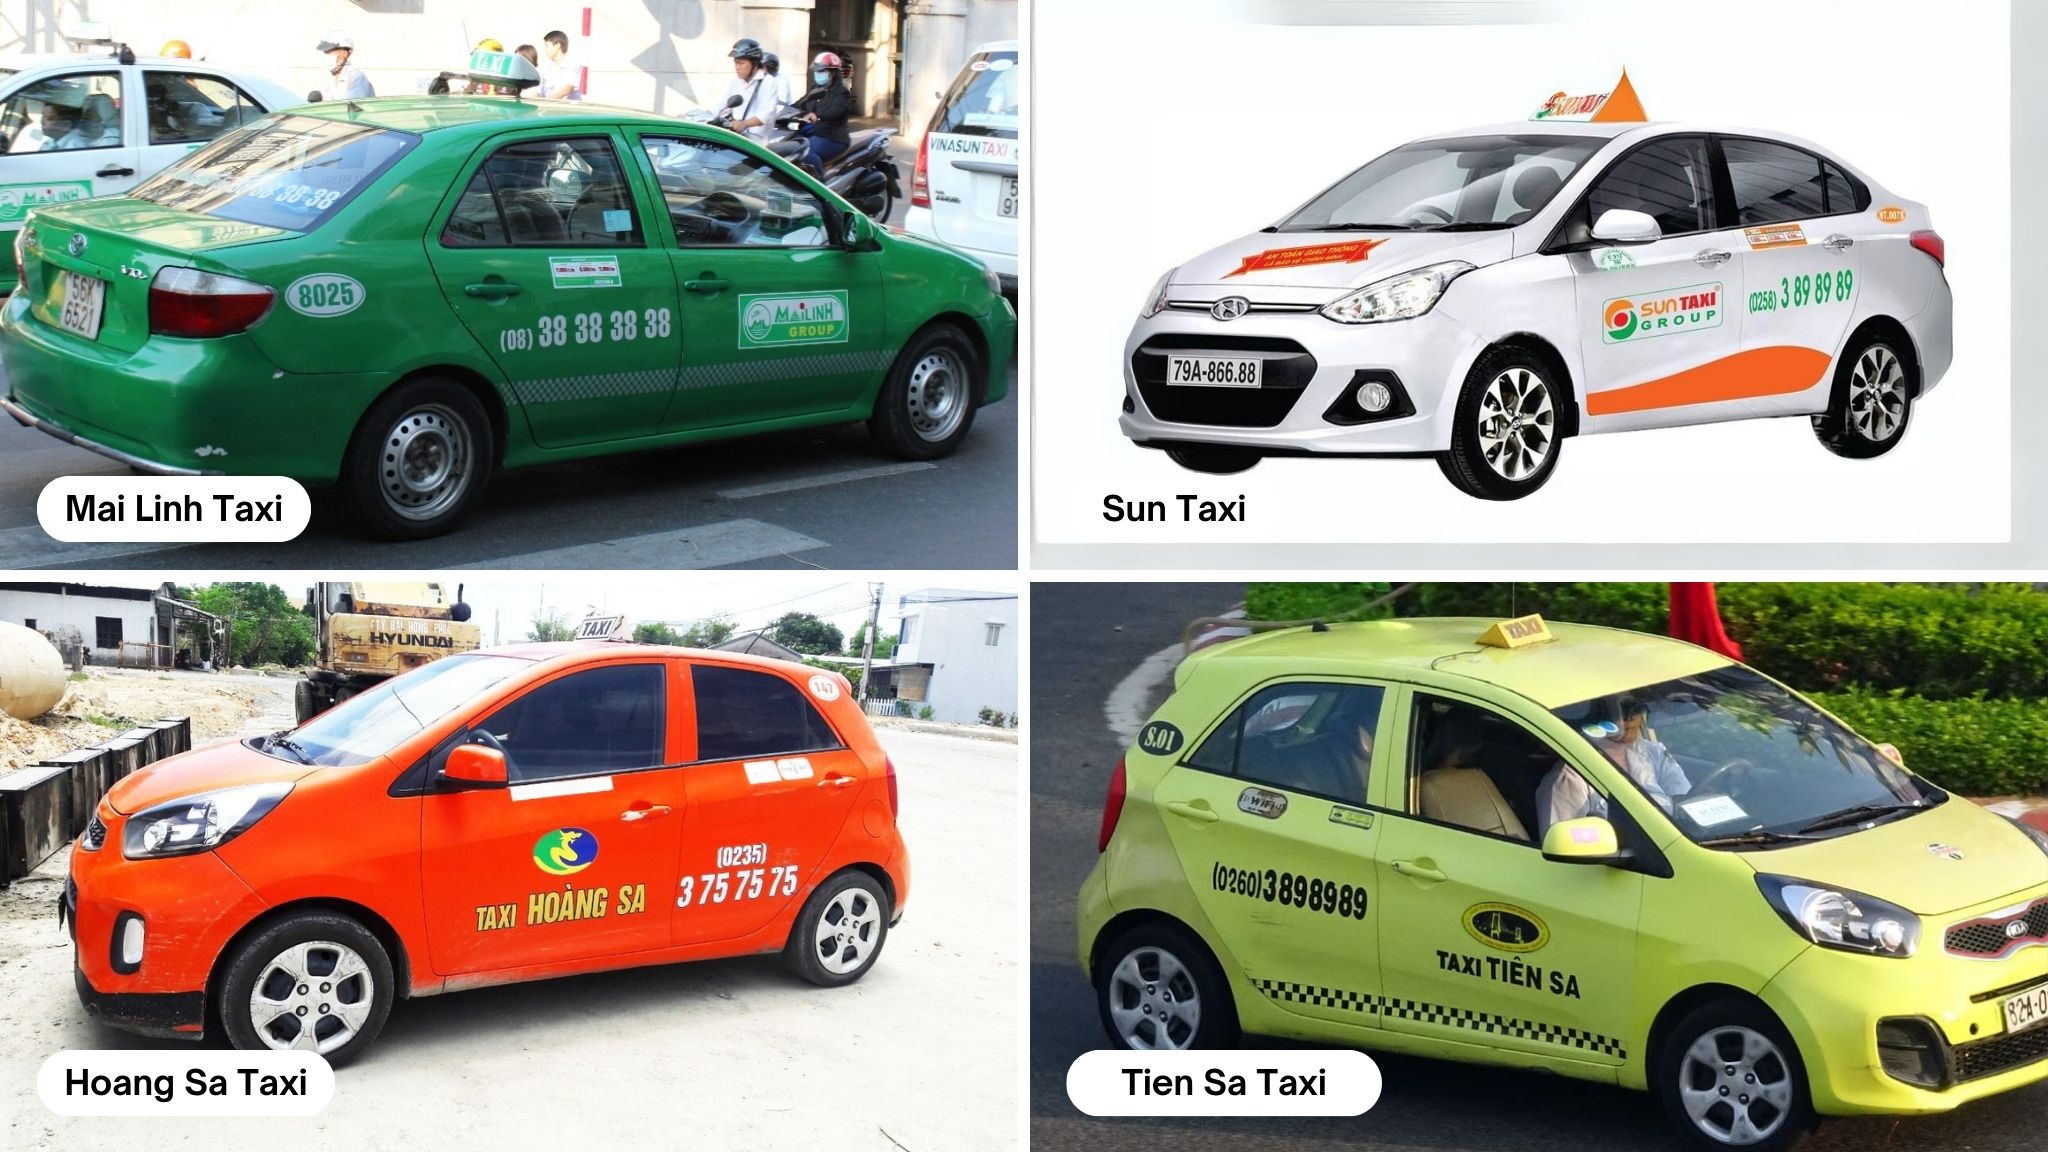 Experience The Friendly Trip With Taxi